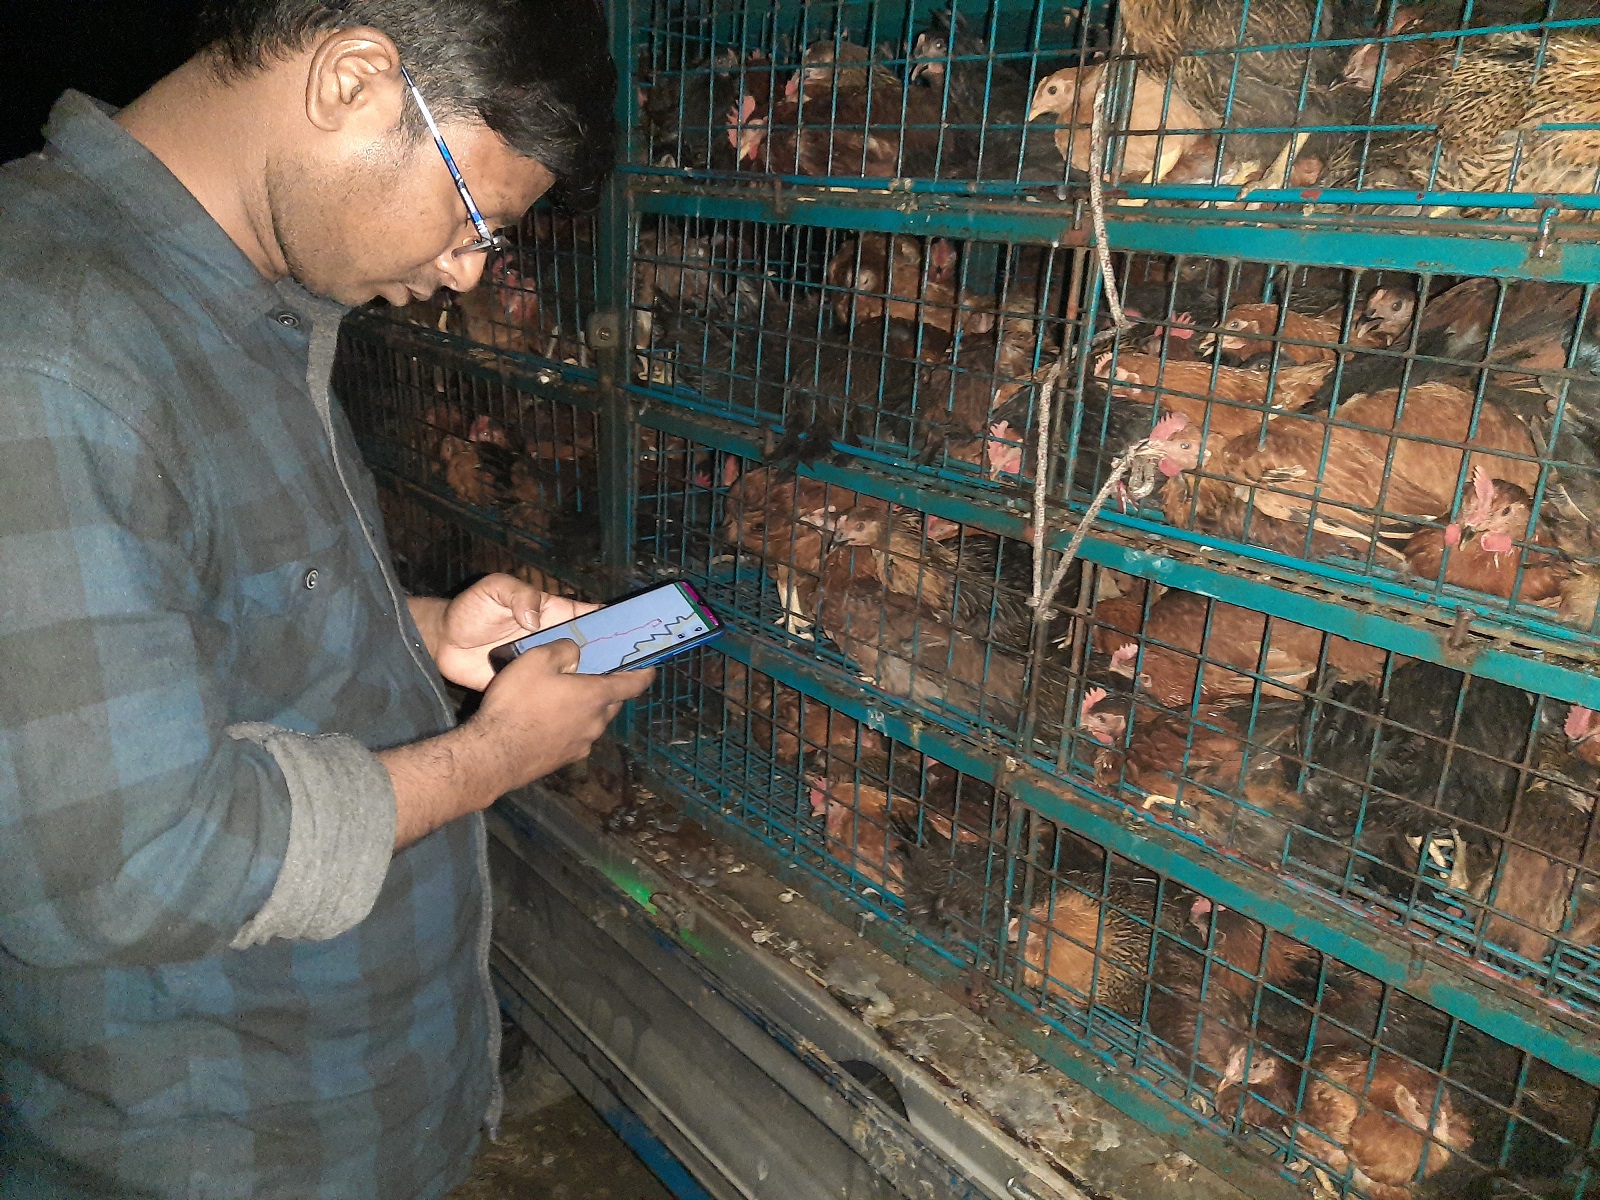 researcher stands by row of chicken cages using mobile phone